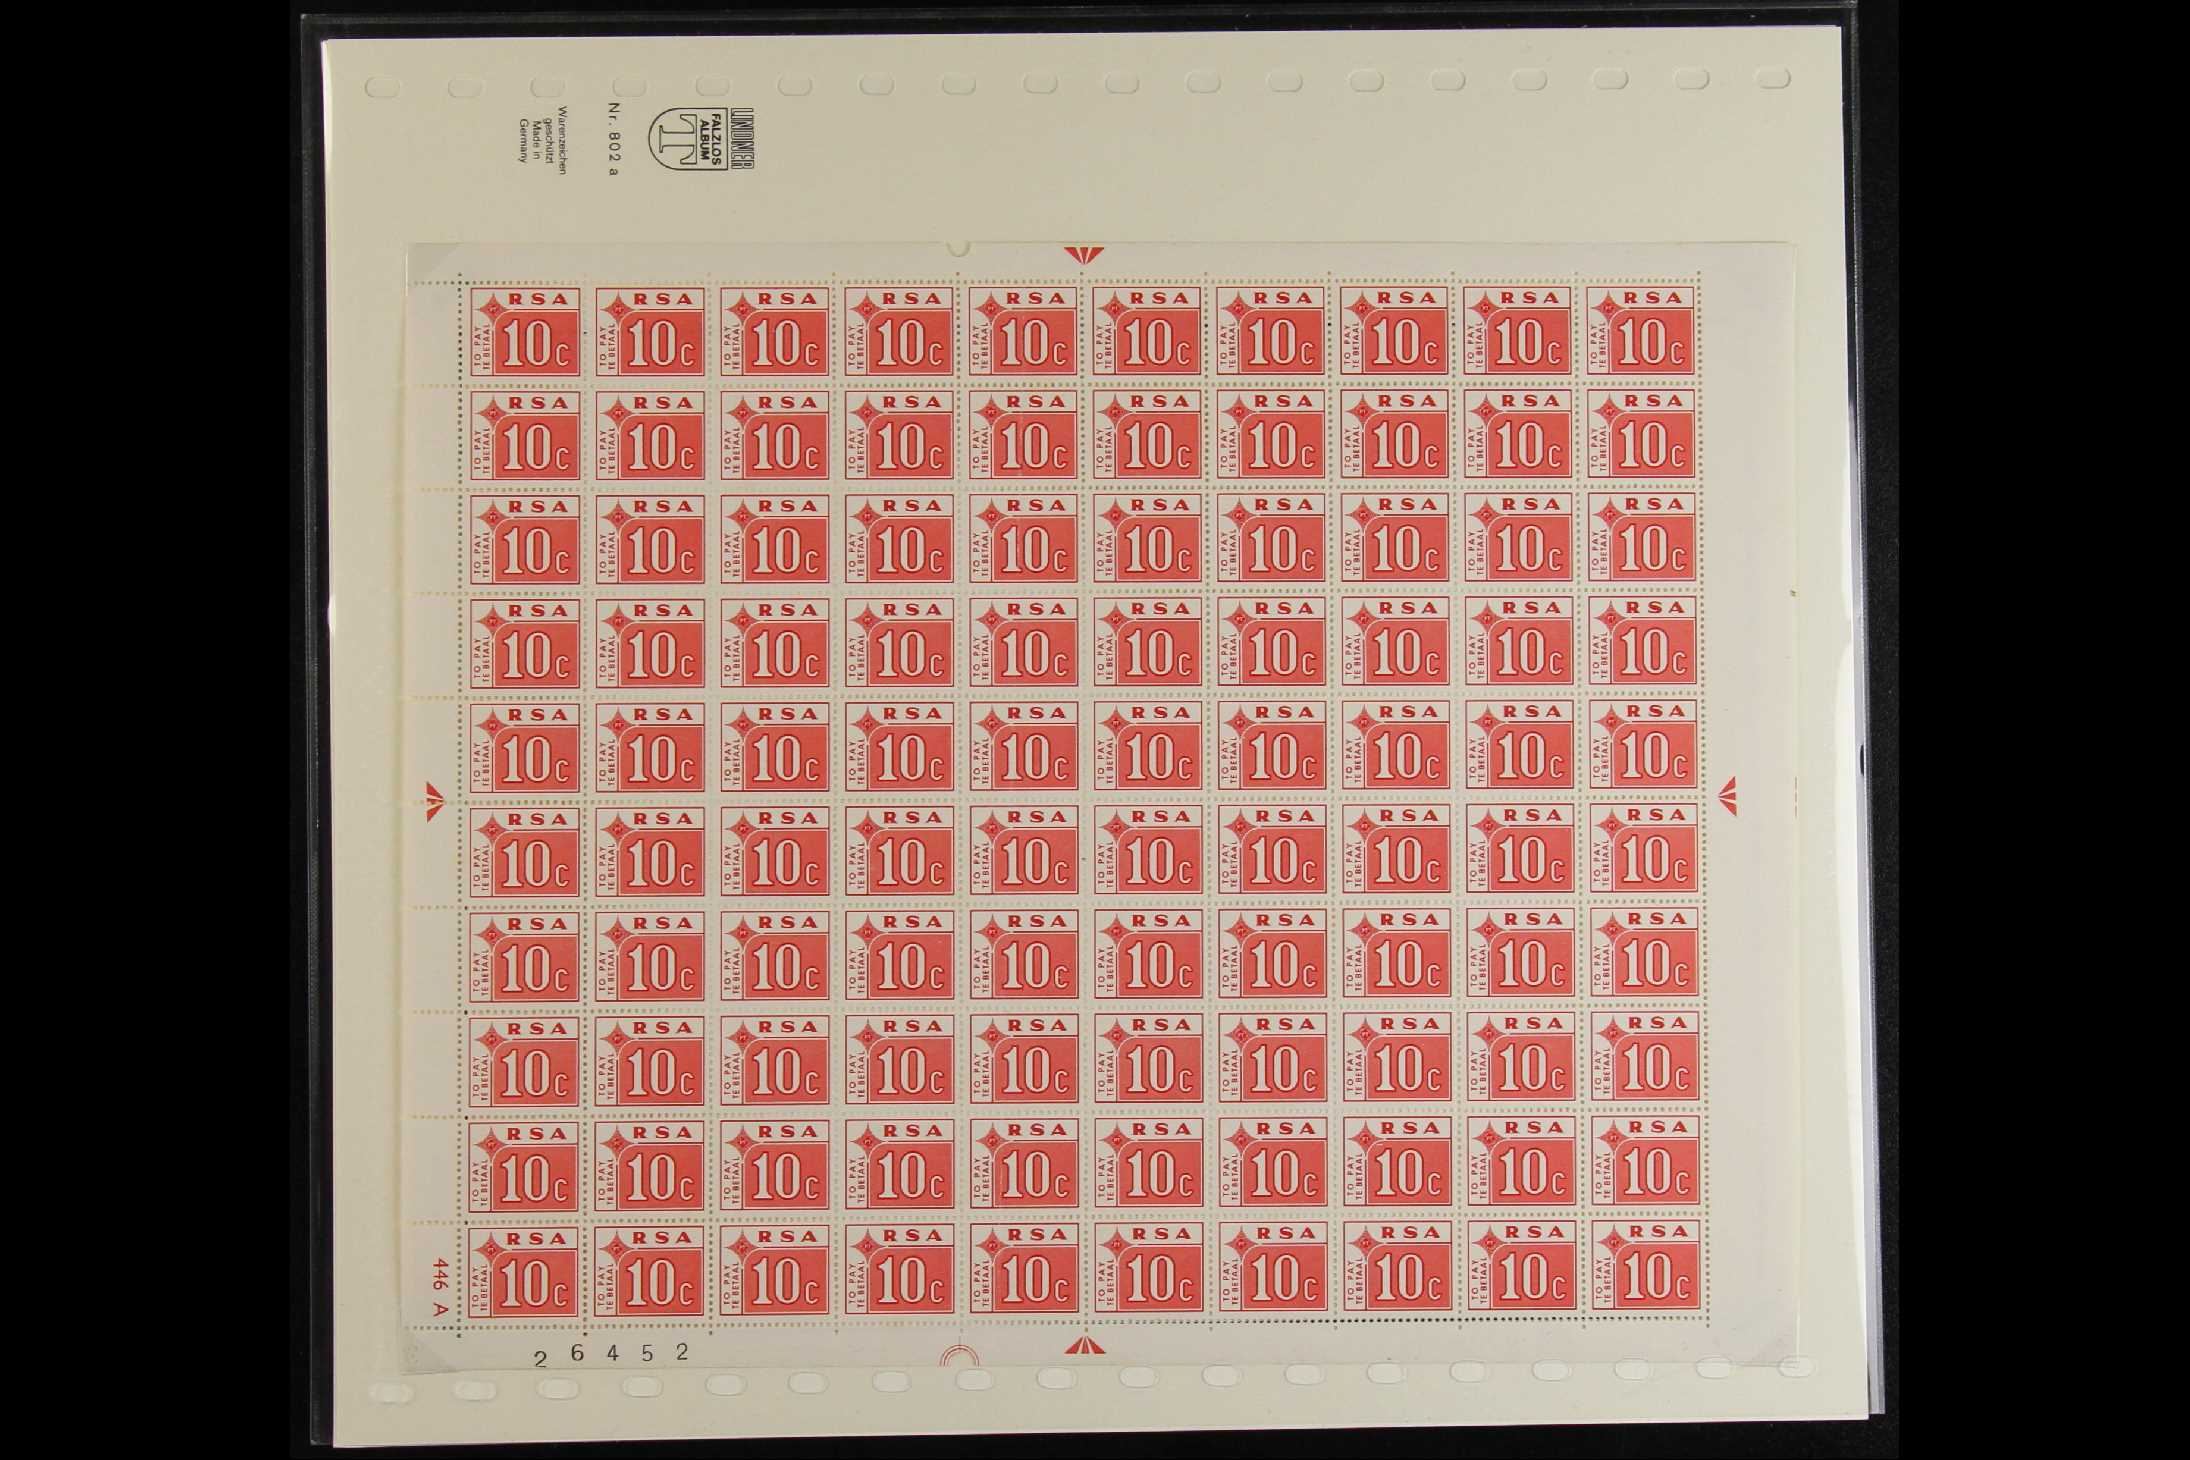 SOUTH AFRICA POSTAGE DUES 1972 complete set, SG D75/80, complete sheet 100 never hinged mint, - Image 6 of 7